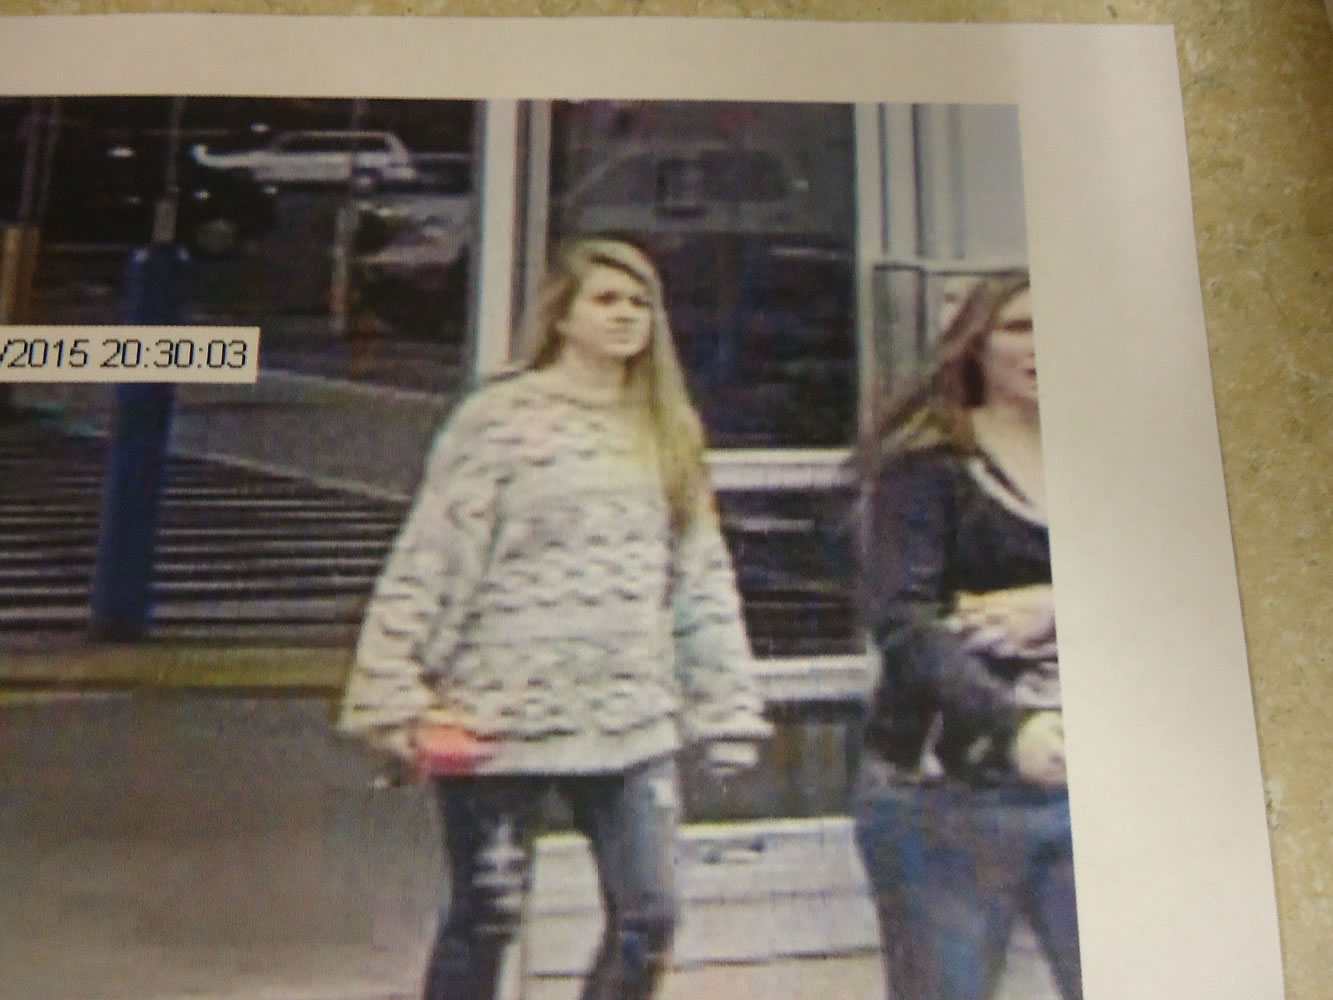 Battle Ground police believe these people were accomplices in a theft from Wal-Mart on Friday.